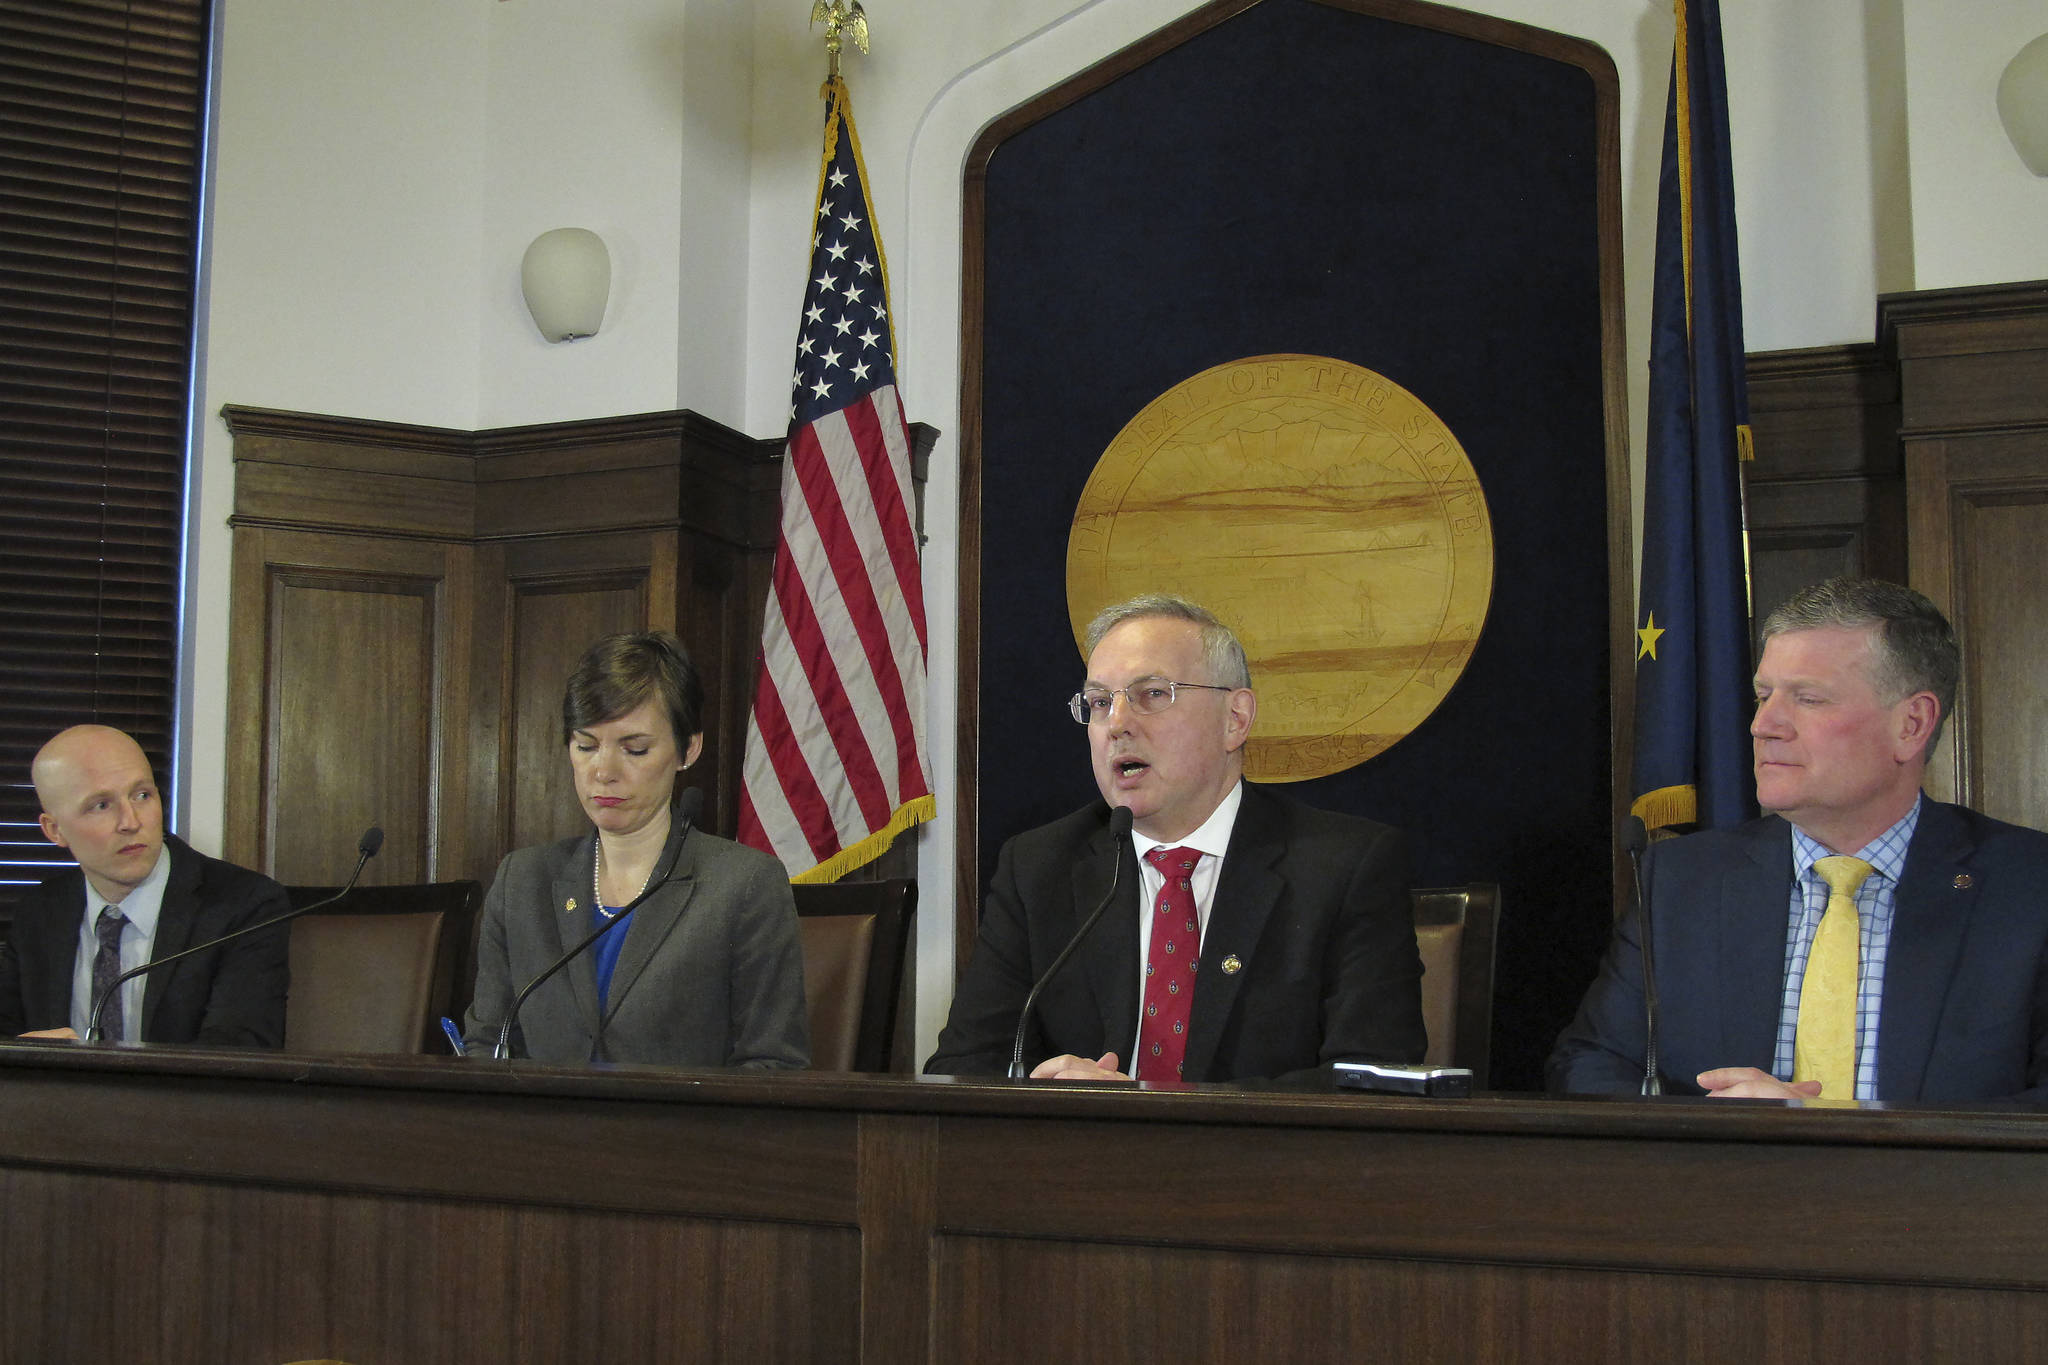 Alaska House Speaker, second from right, speaks to reporters on Monday, March 16, 2020, in Juneau, Alaska. Pictured from left are Reps. Jonathan Kreiss-Tomkins, Ivy Spohnholz, Edgmon and Chuck Kopp. (AP Photo/Becky Bohrer)